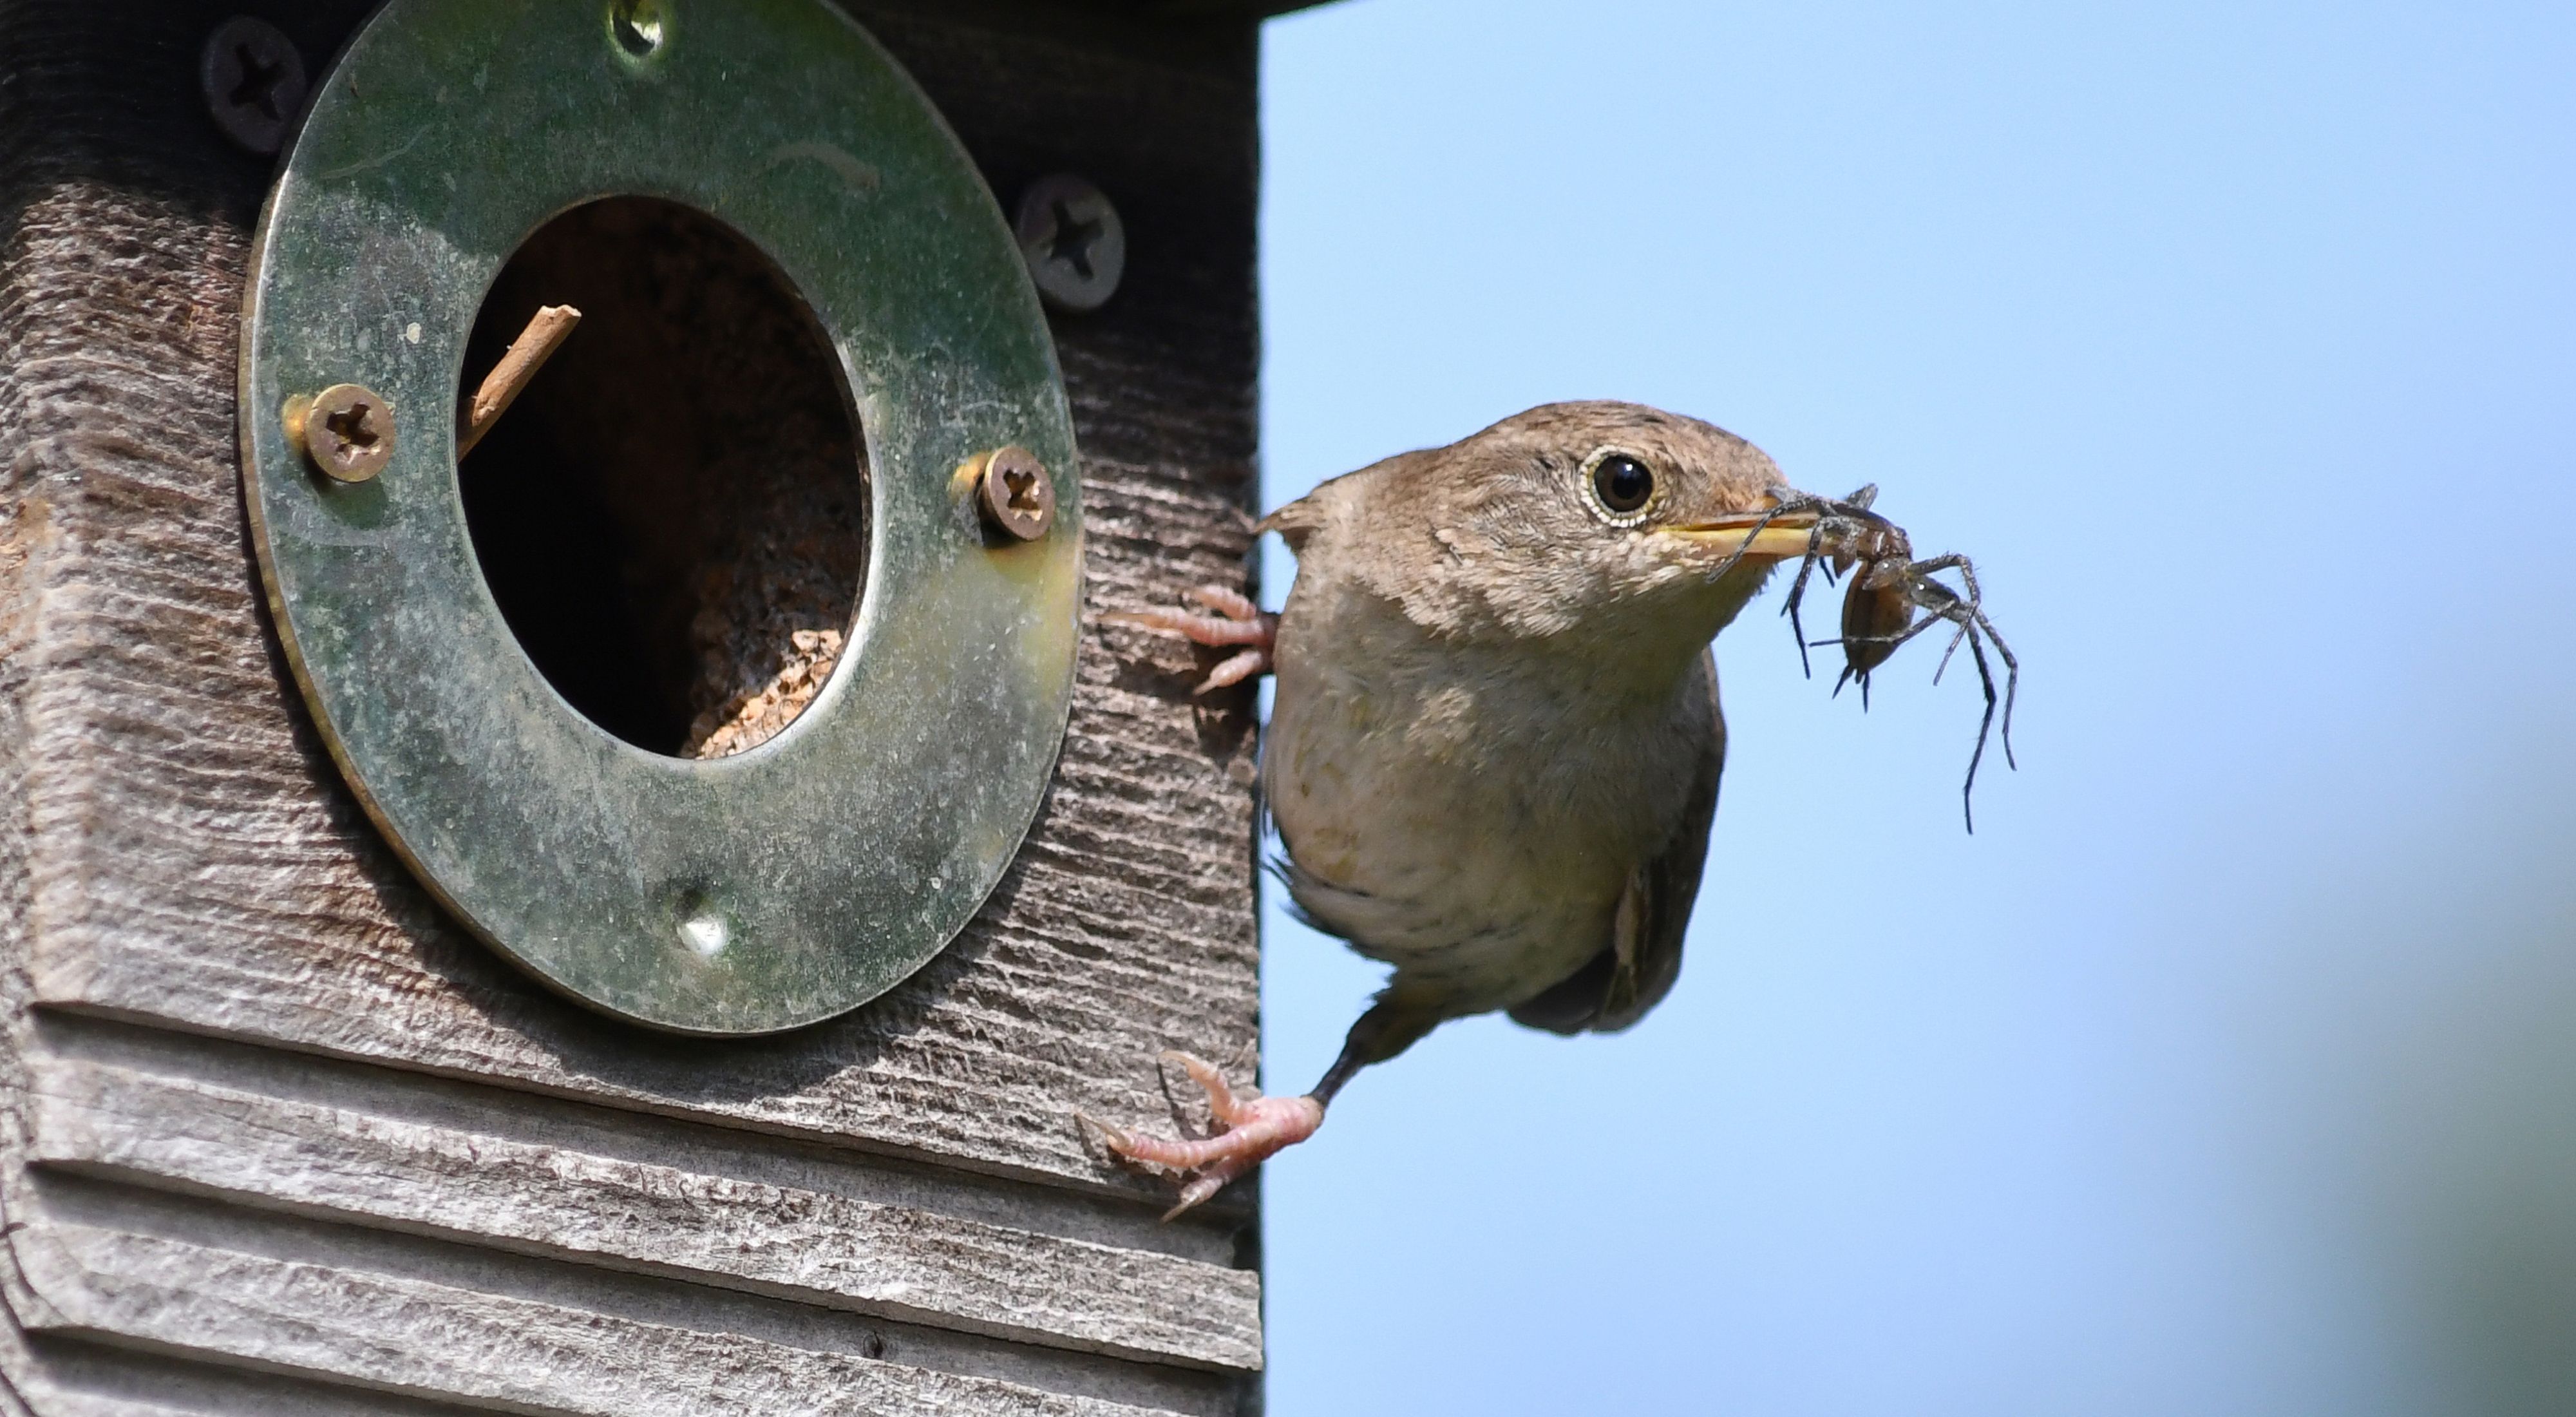 House wren enjoys a spider for a meal.